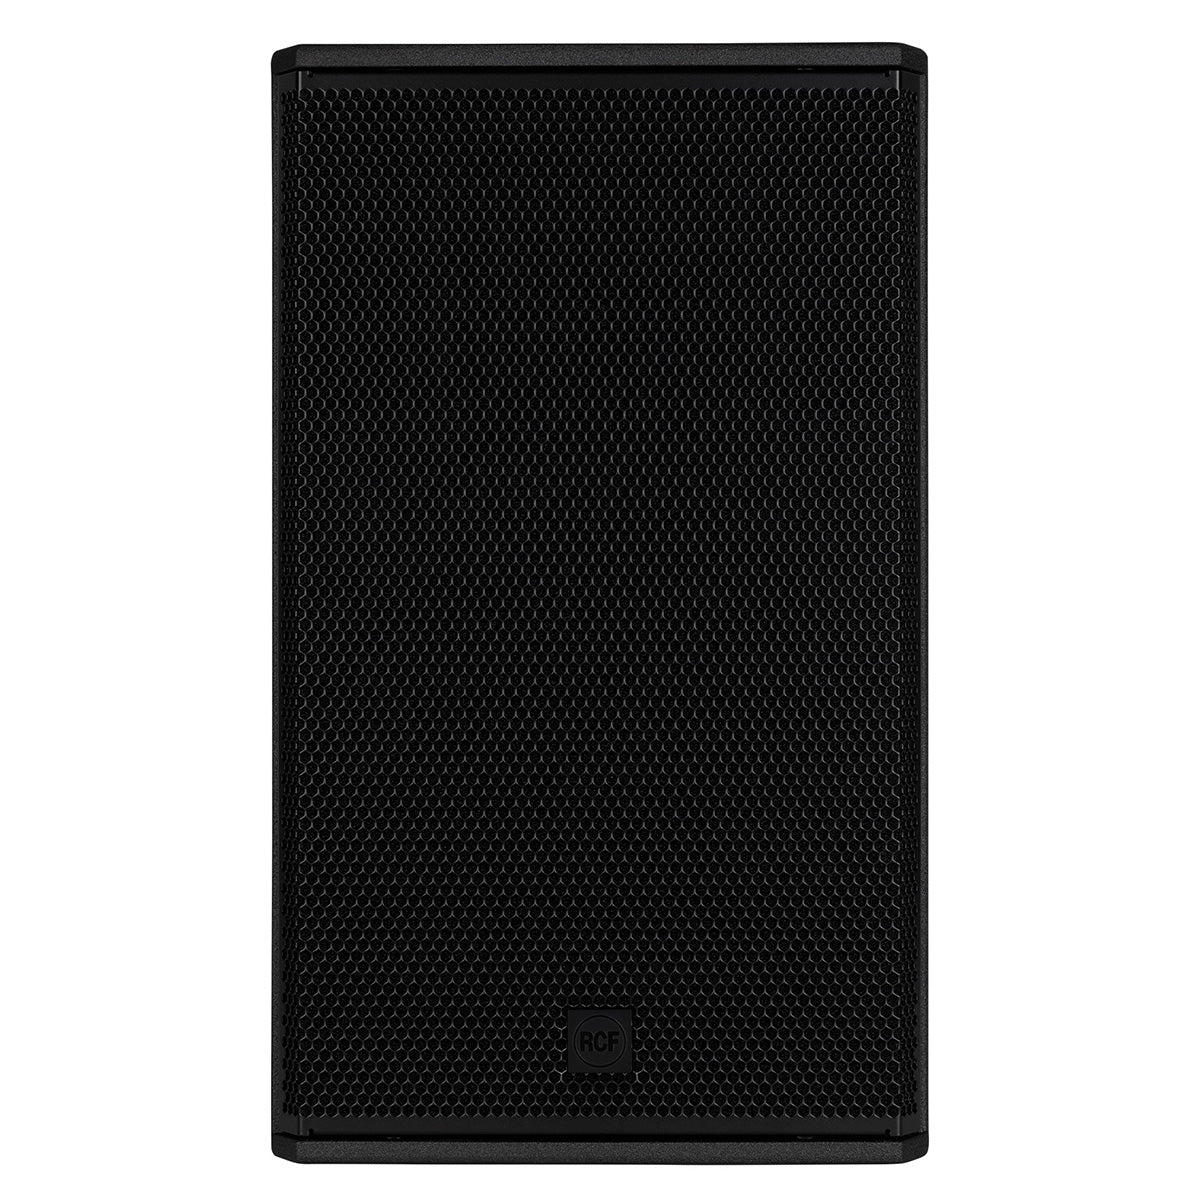 RCF NX 915-A Two Way Active PA Speaker